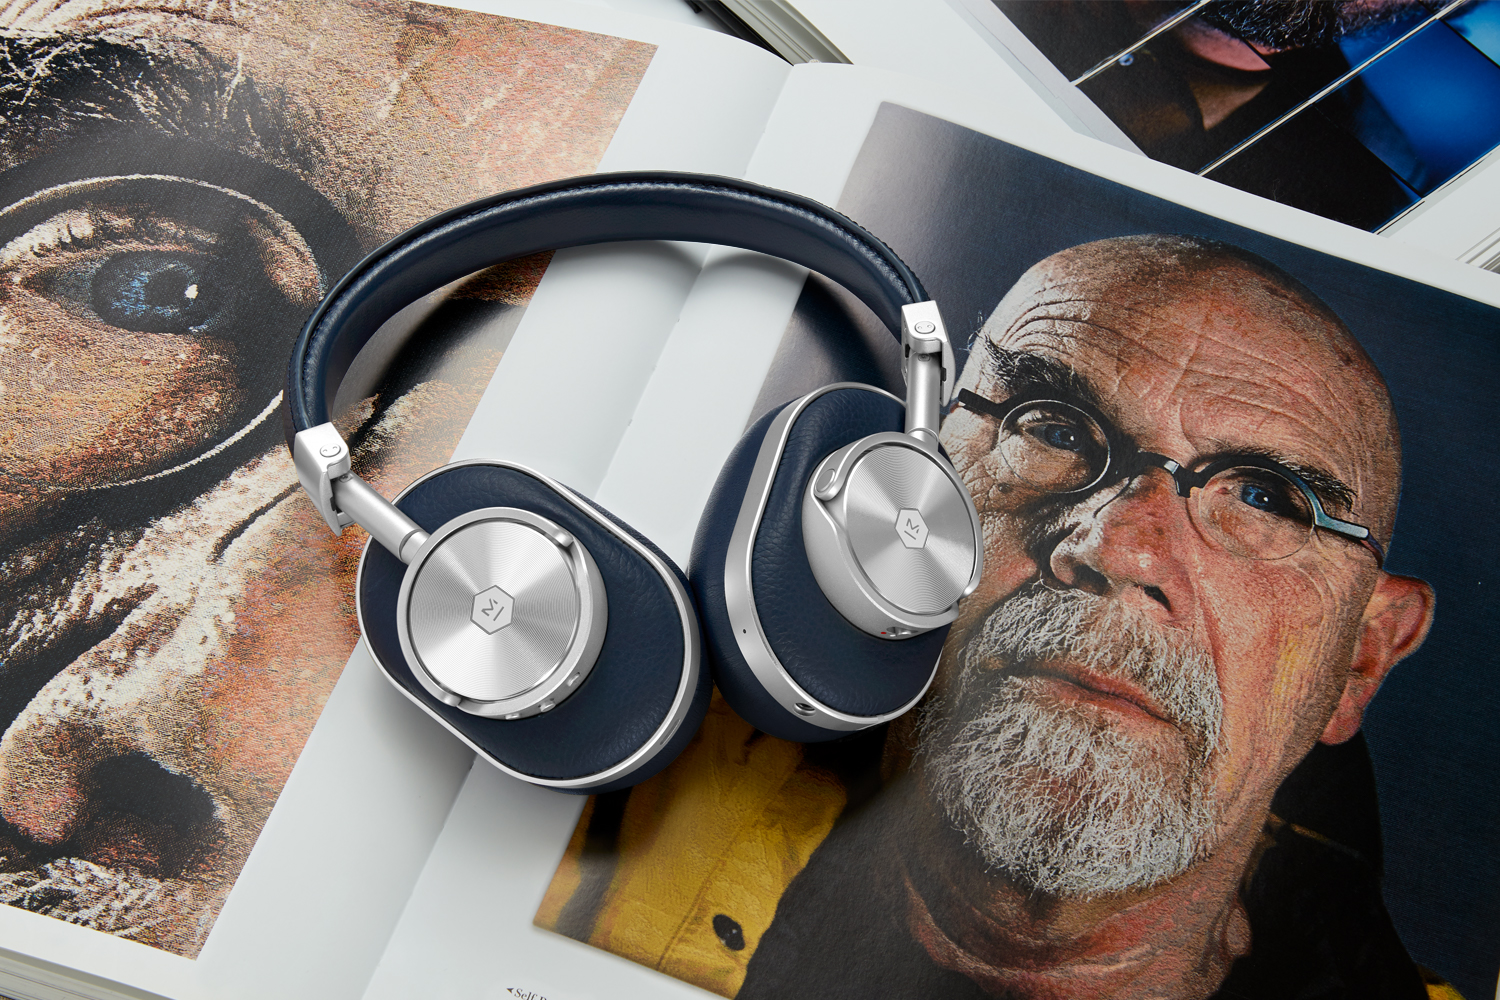 Introducing New MW60 Wireless Headphones In Navy Inspired By Chuck Close